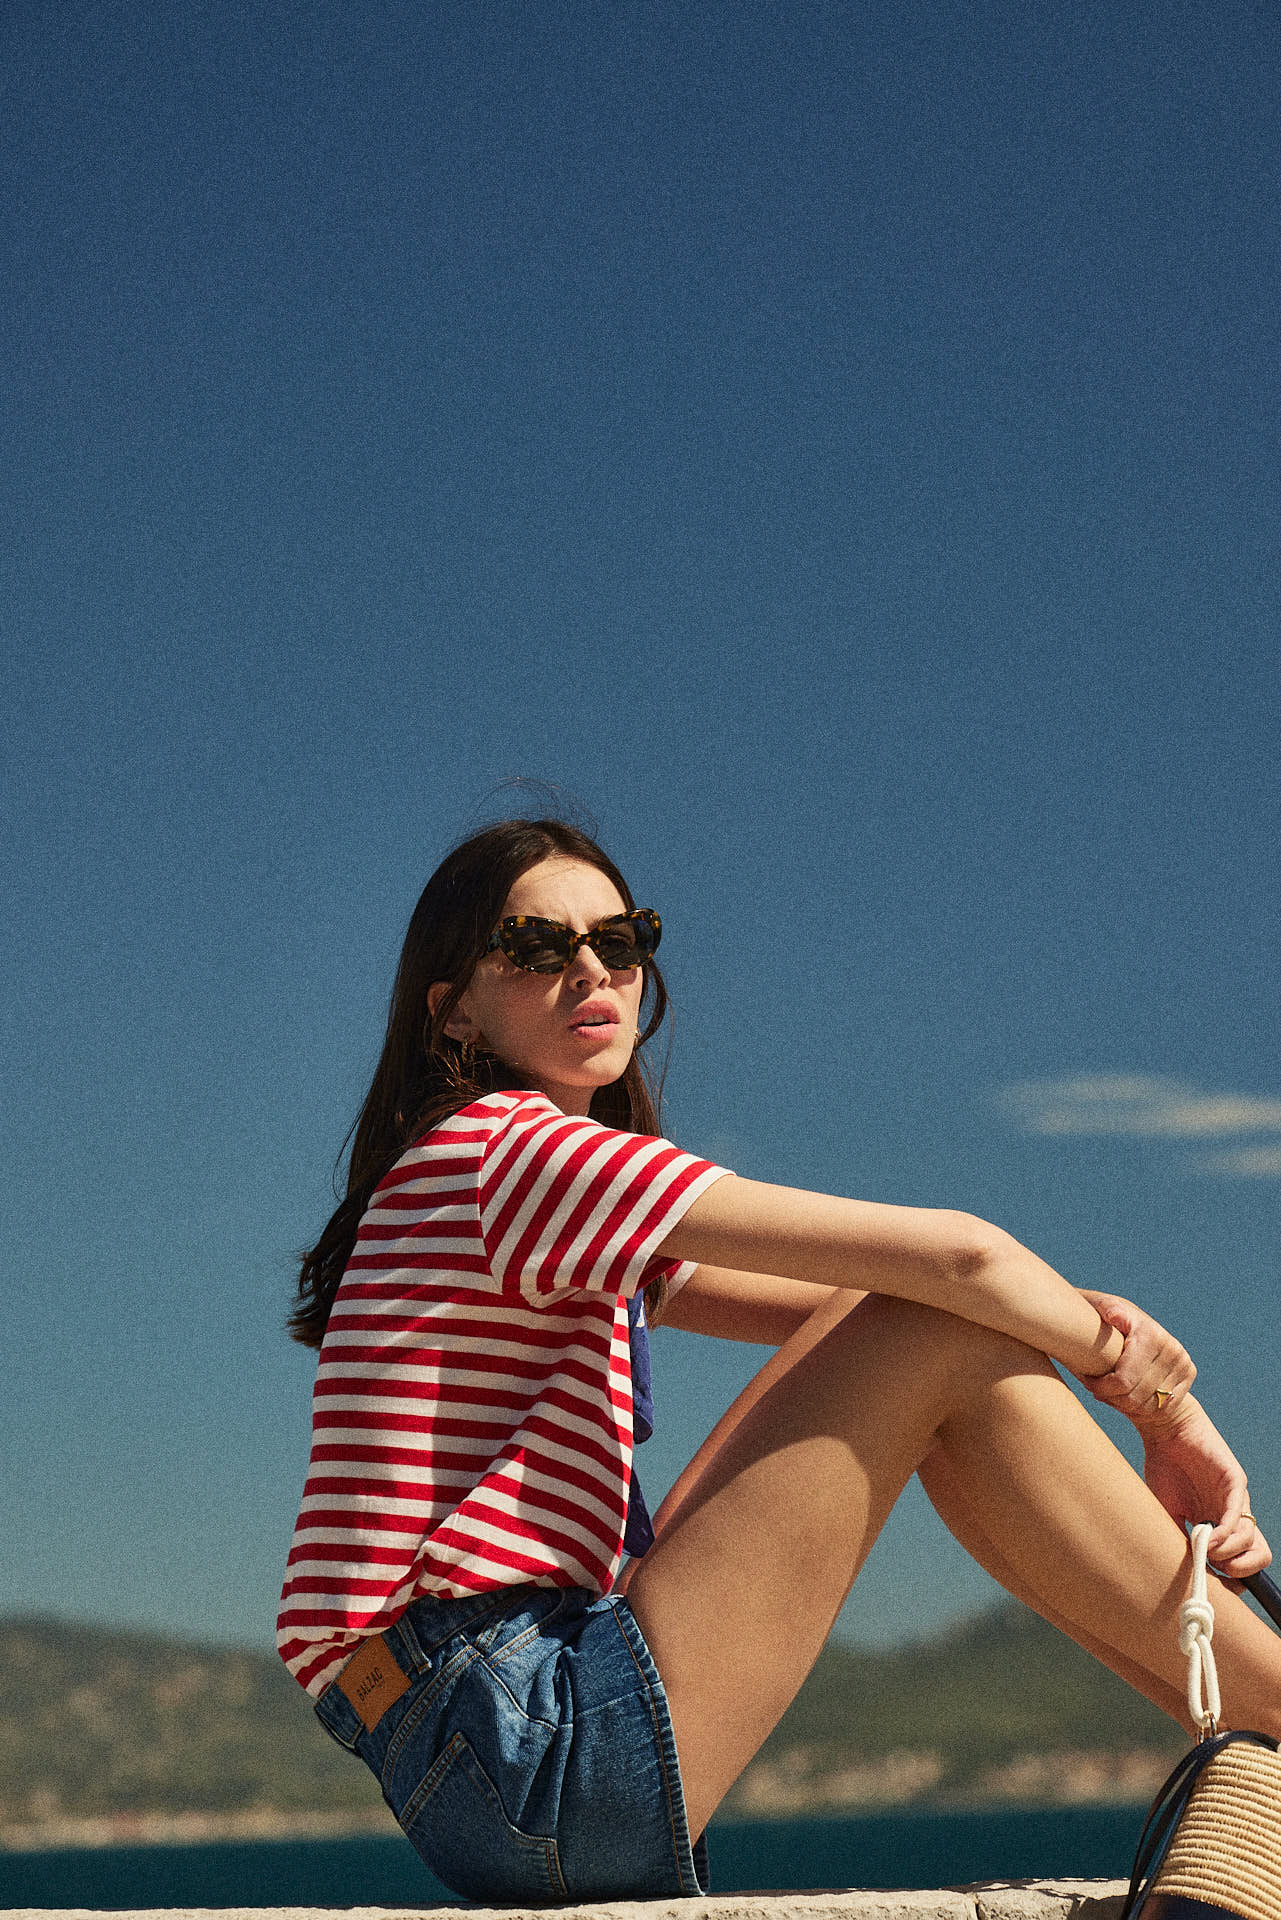 Bree red and white striped t-shirt